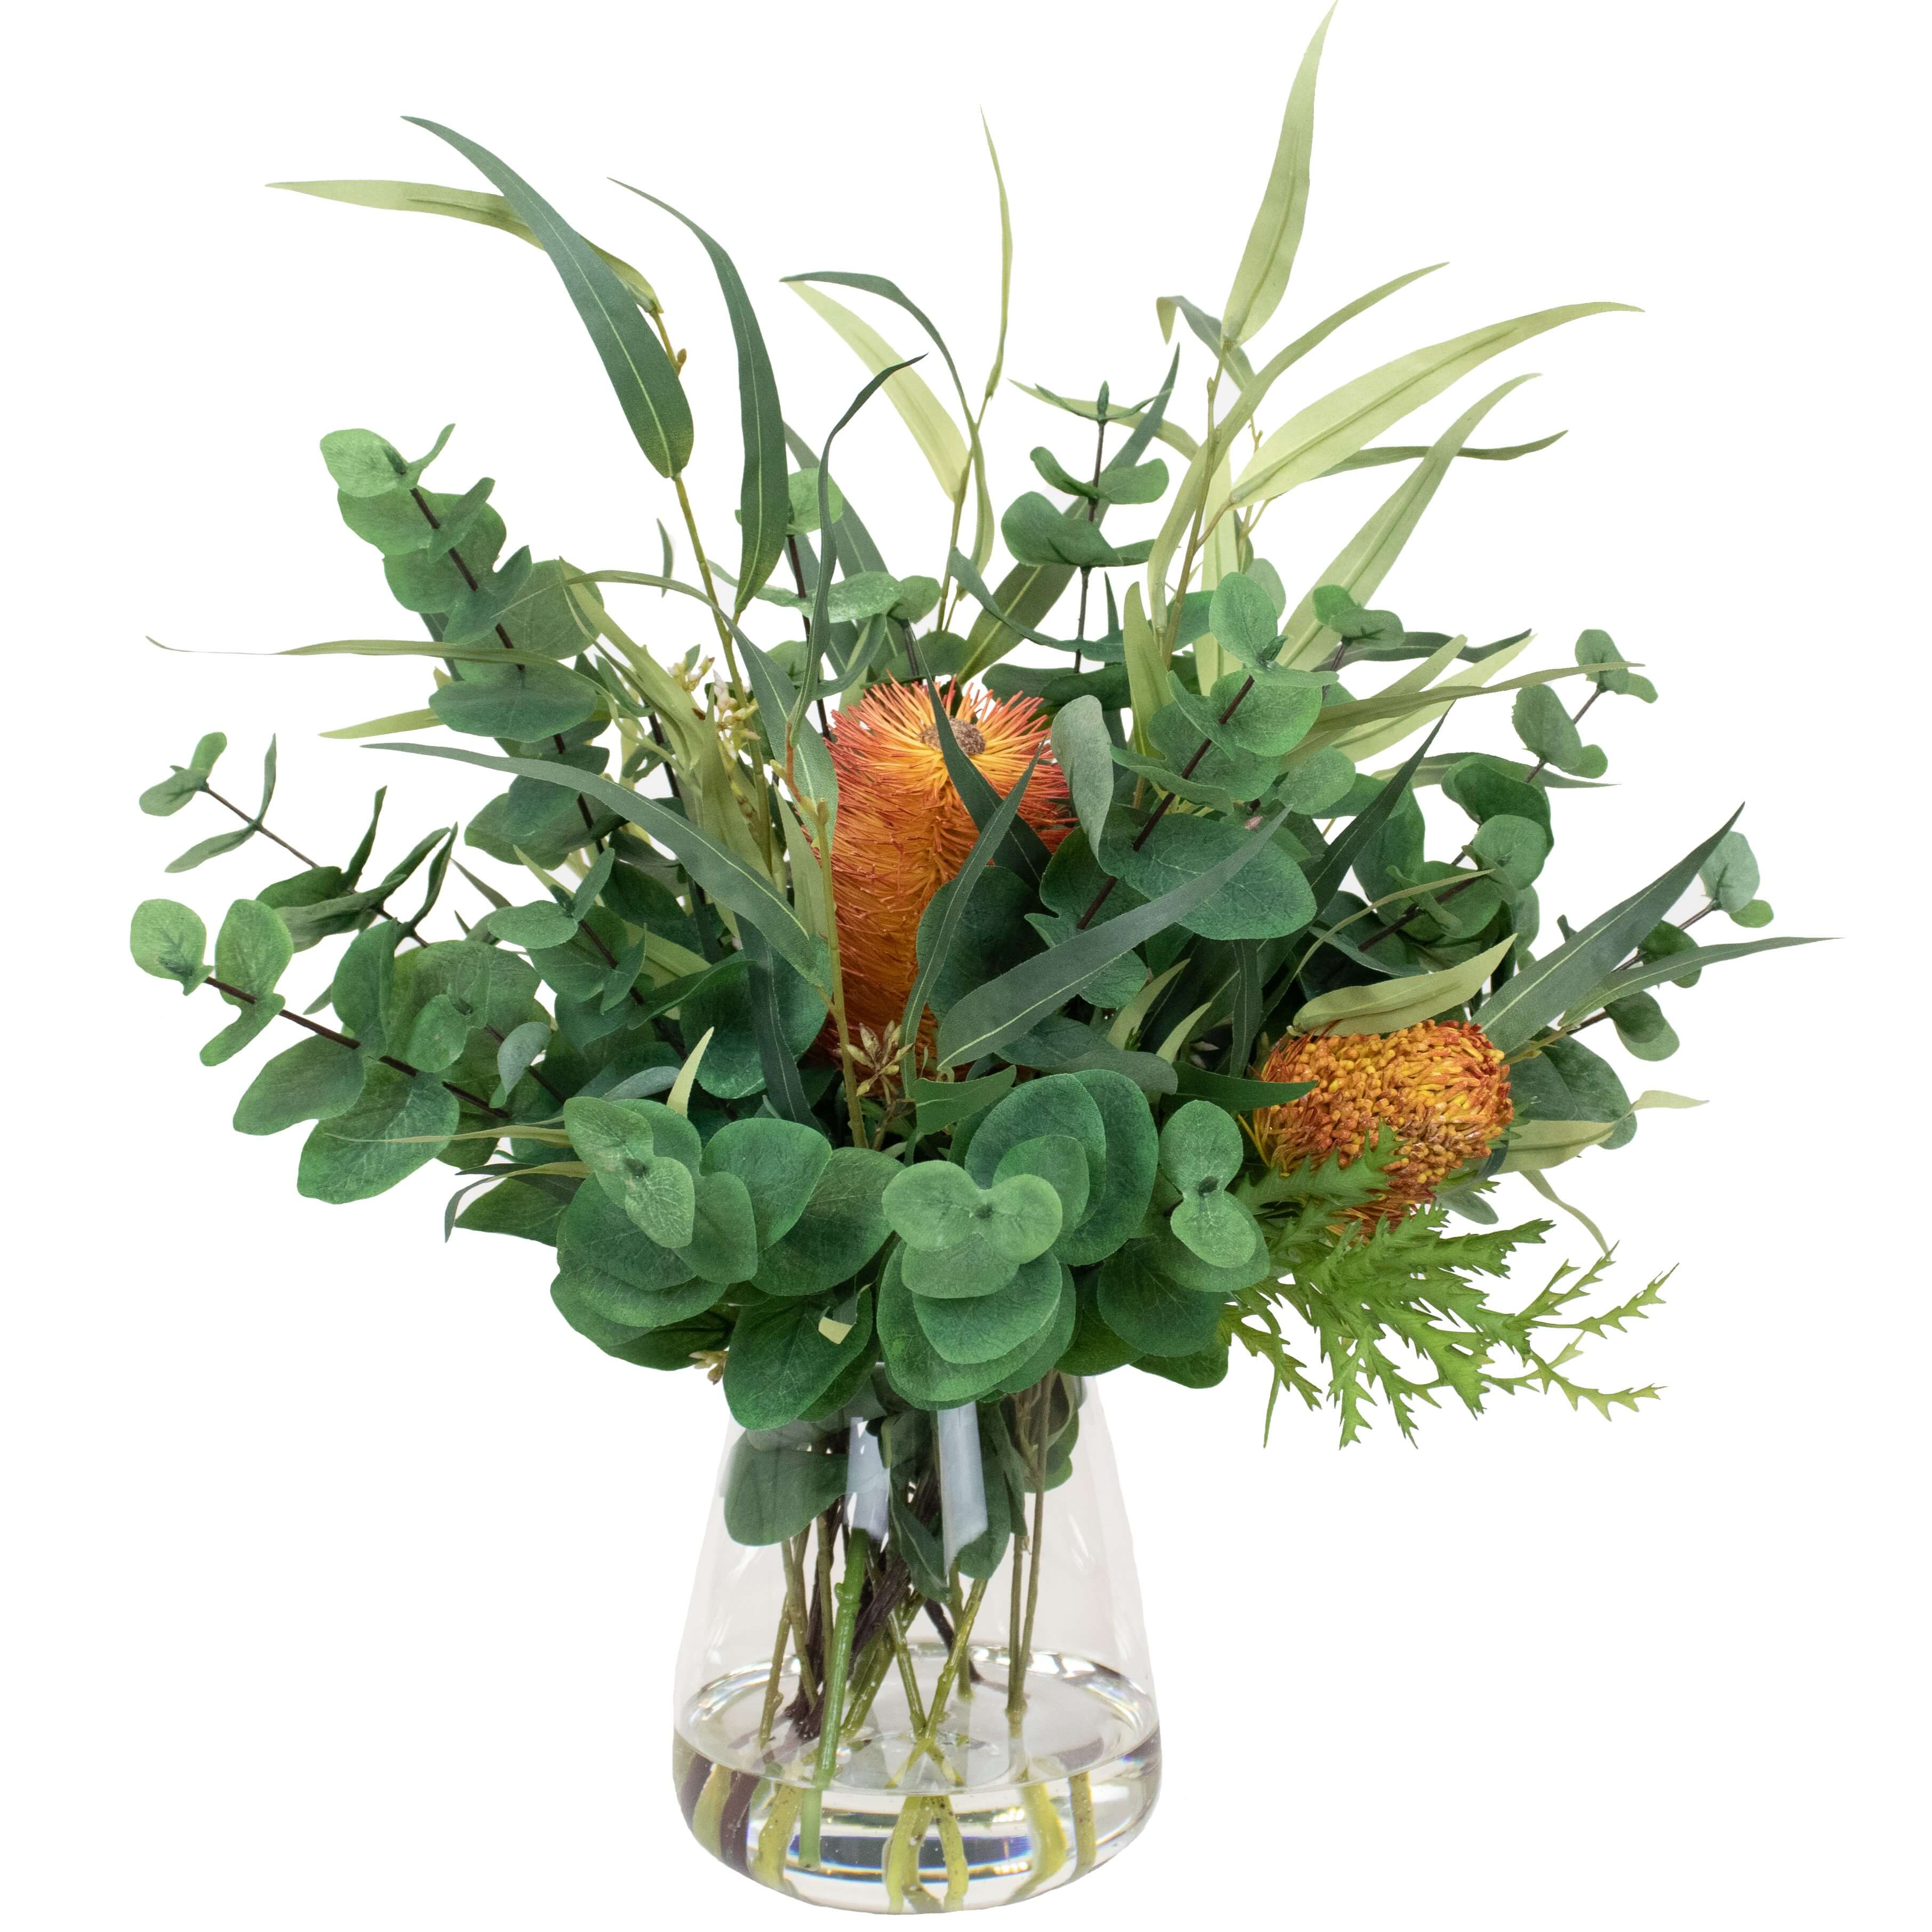 Artificial flowers and leaves in a fake flowers arrangement